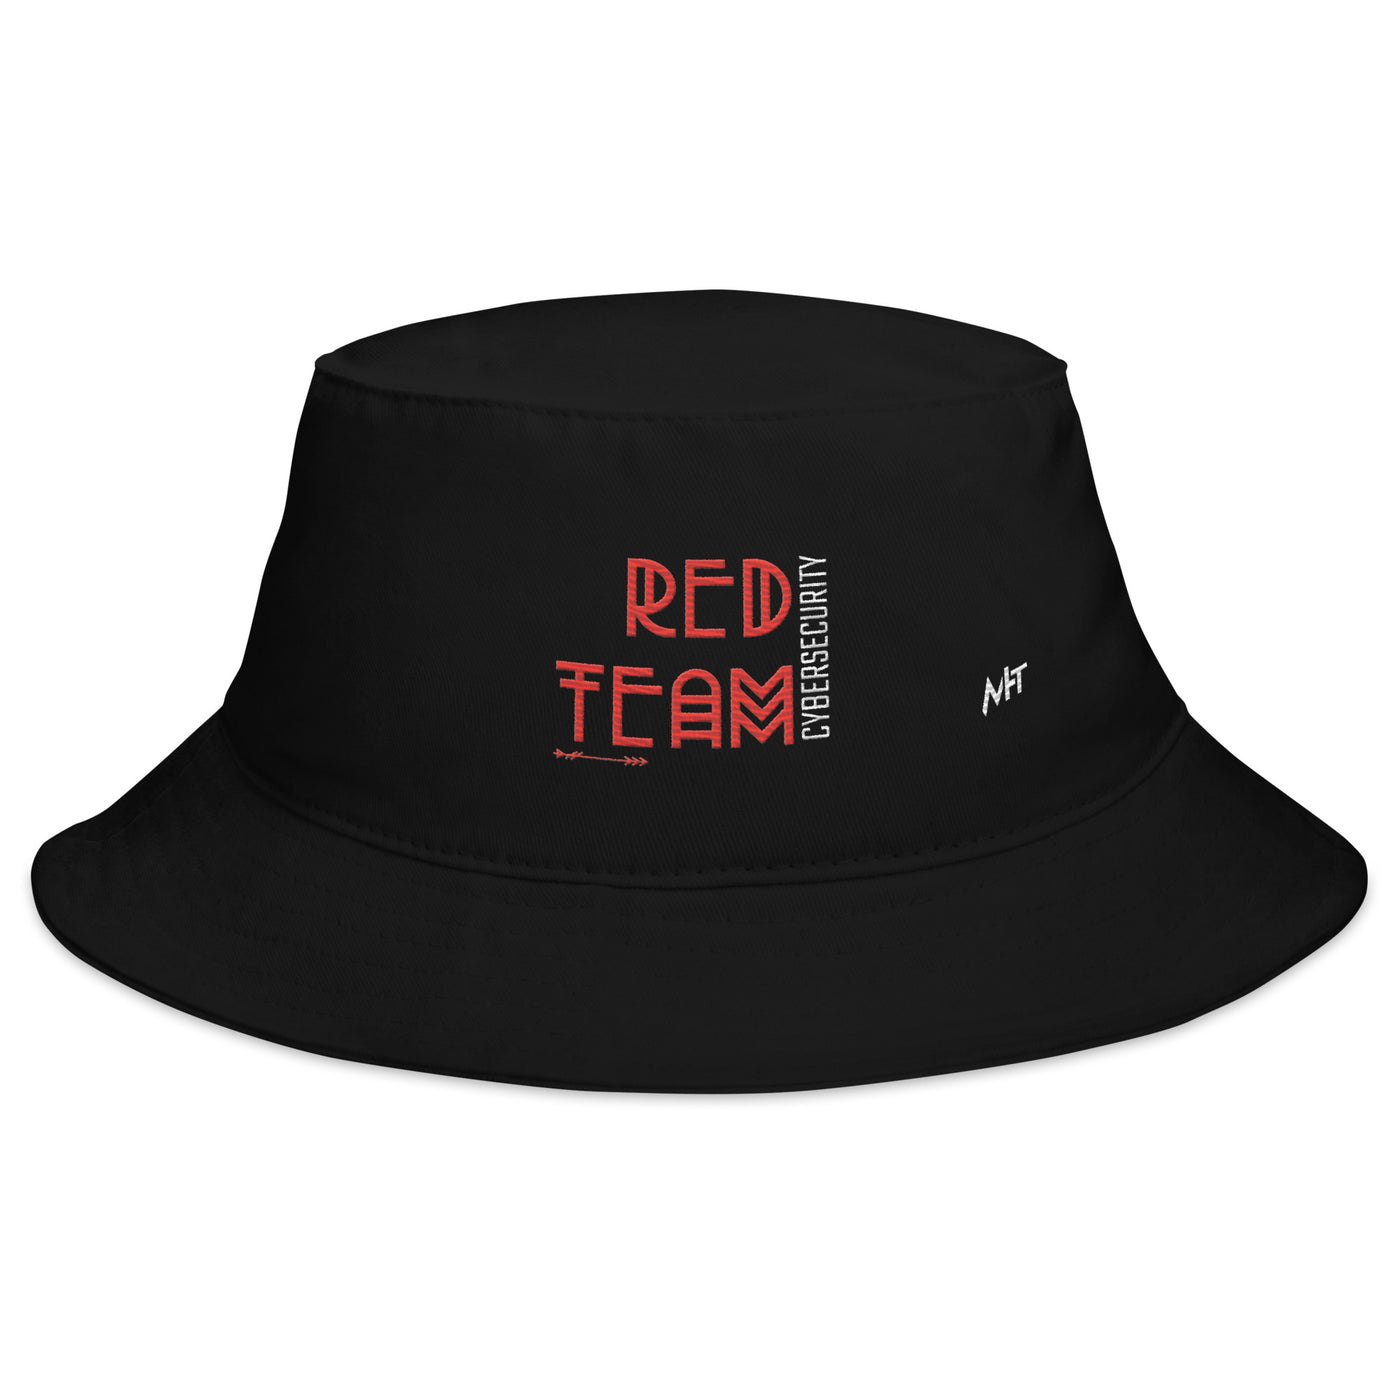 Cyber Security Red Team V5 - Bucket Hat